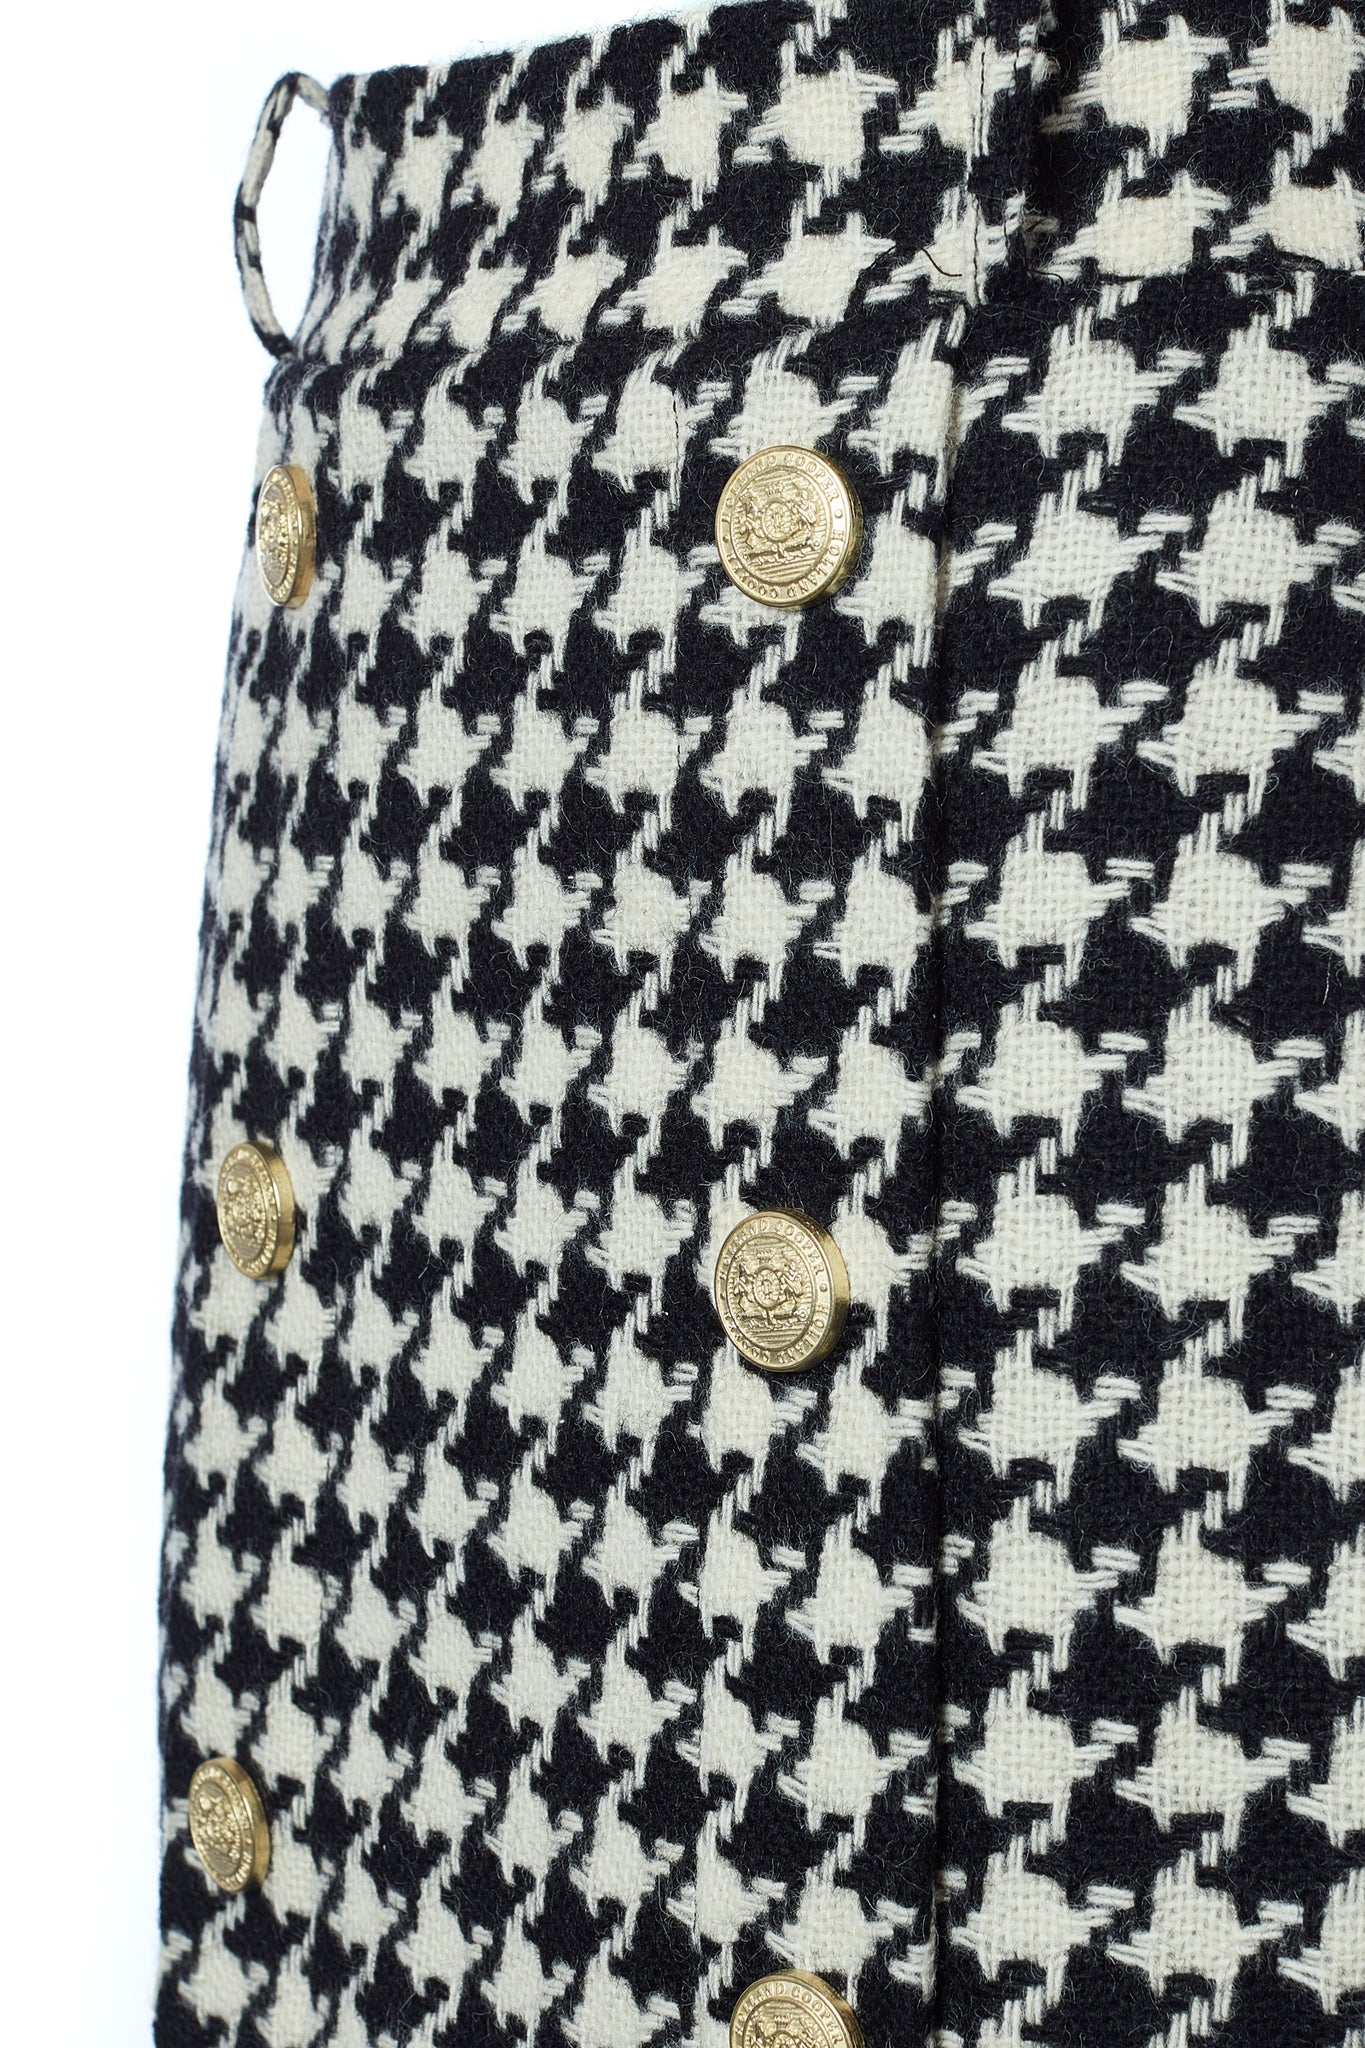 gold rivet front detail of womens black and white large scale houndstooth wool pencil mini skirt with concealed zip fastening on centre back and gold rivets down front